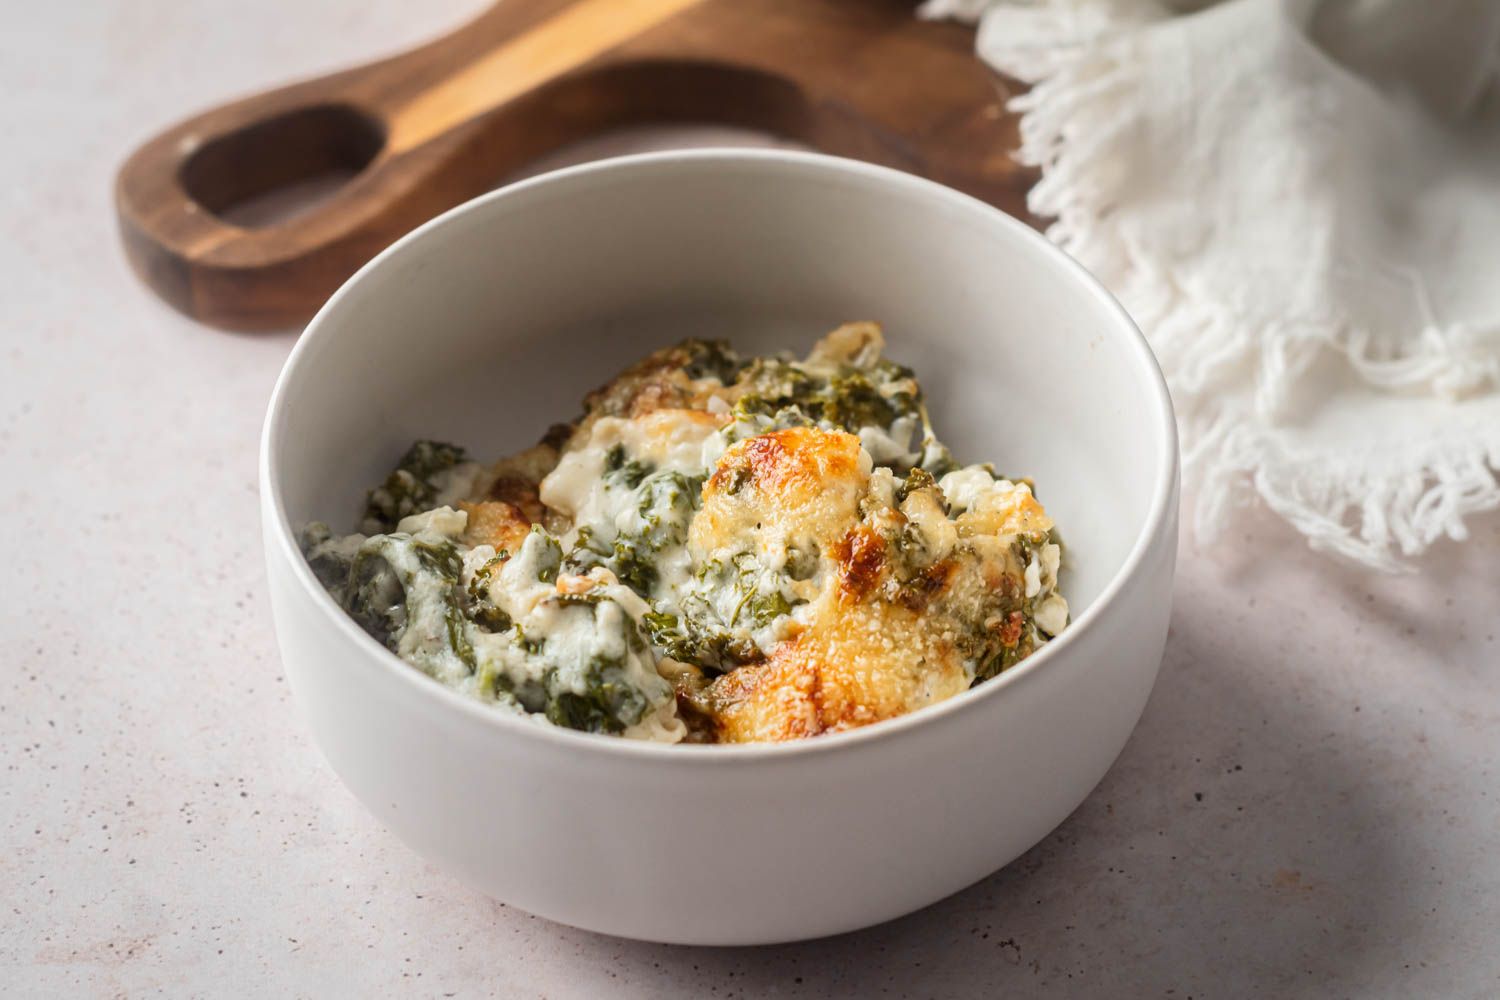 Creamed parmesan kale with tender kale in a light cream sauce with melted Parmesan cheese.